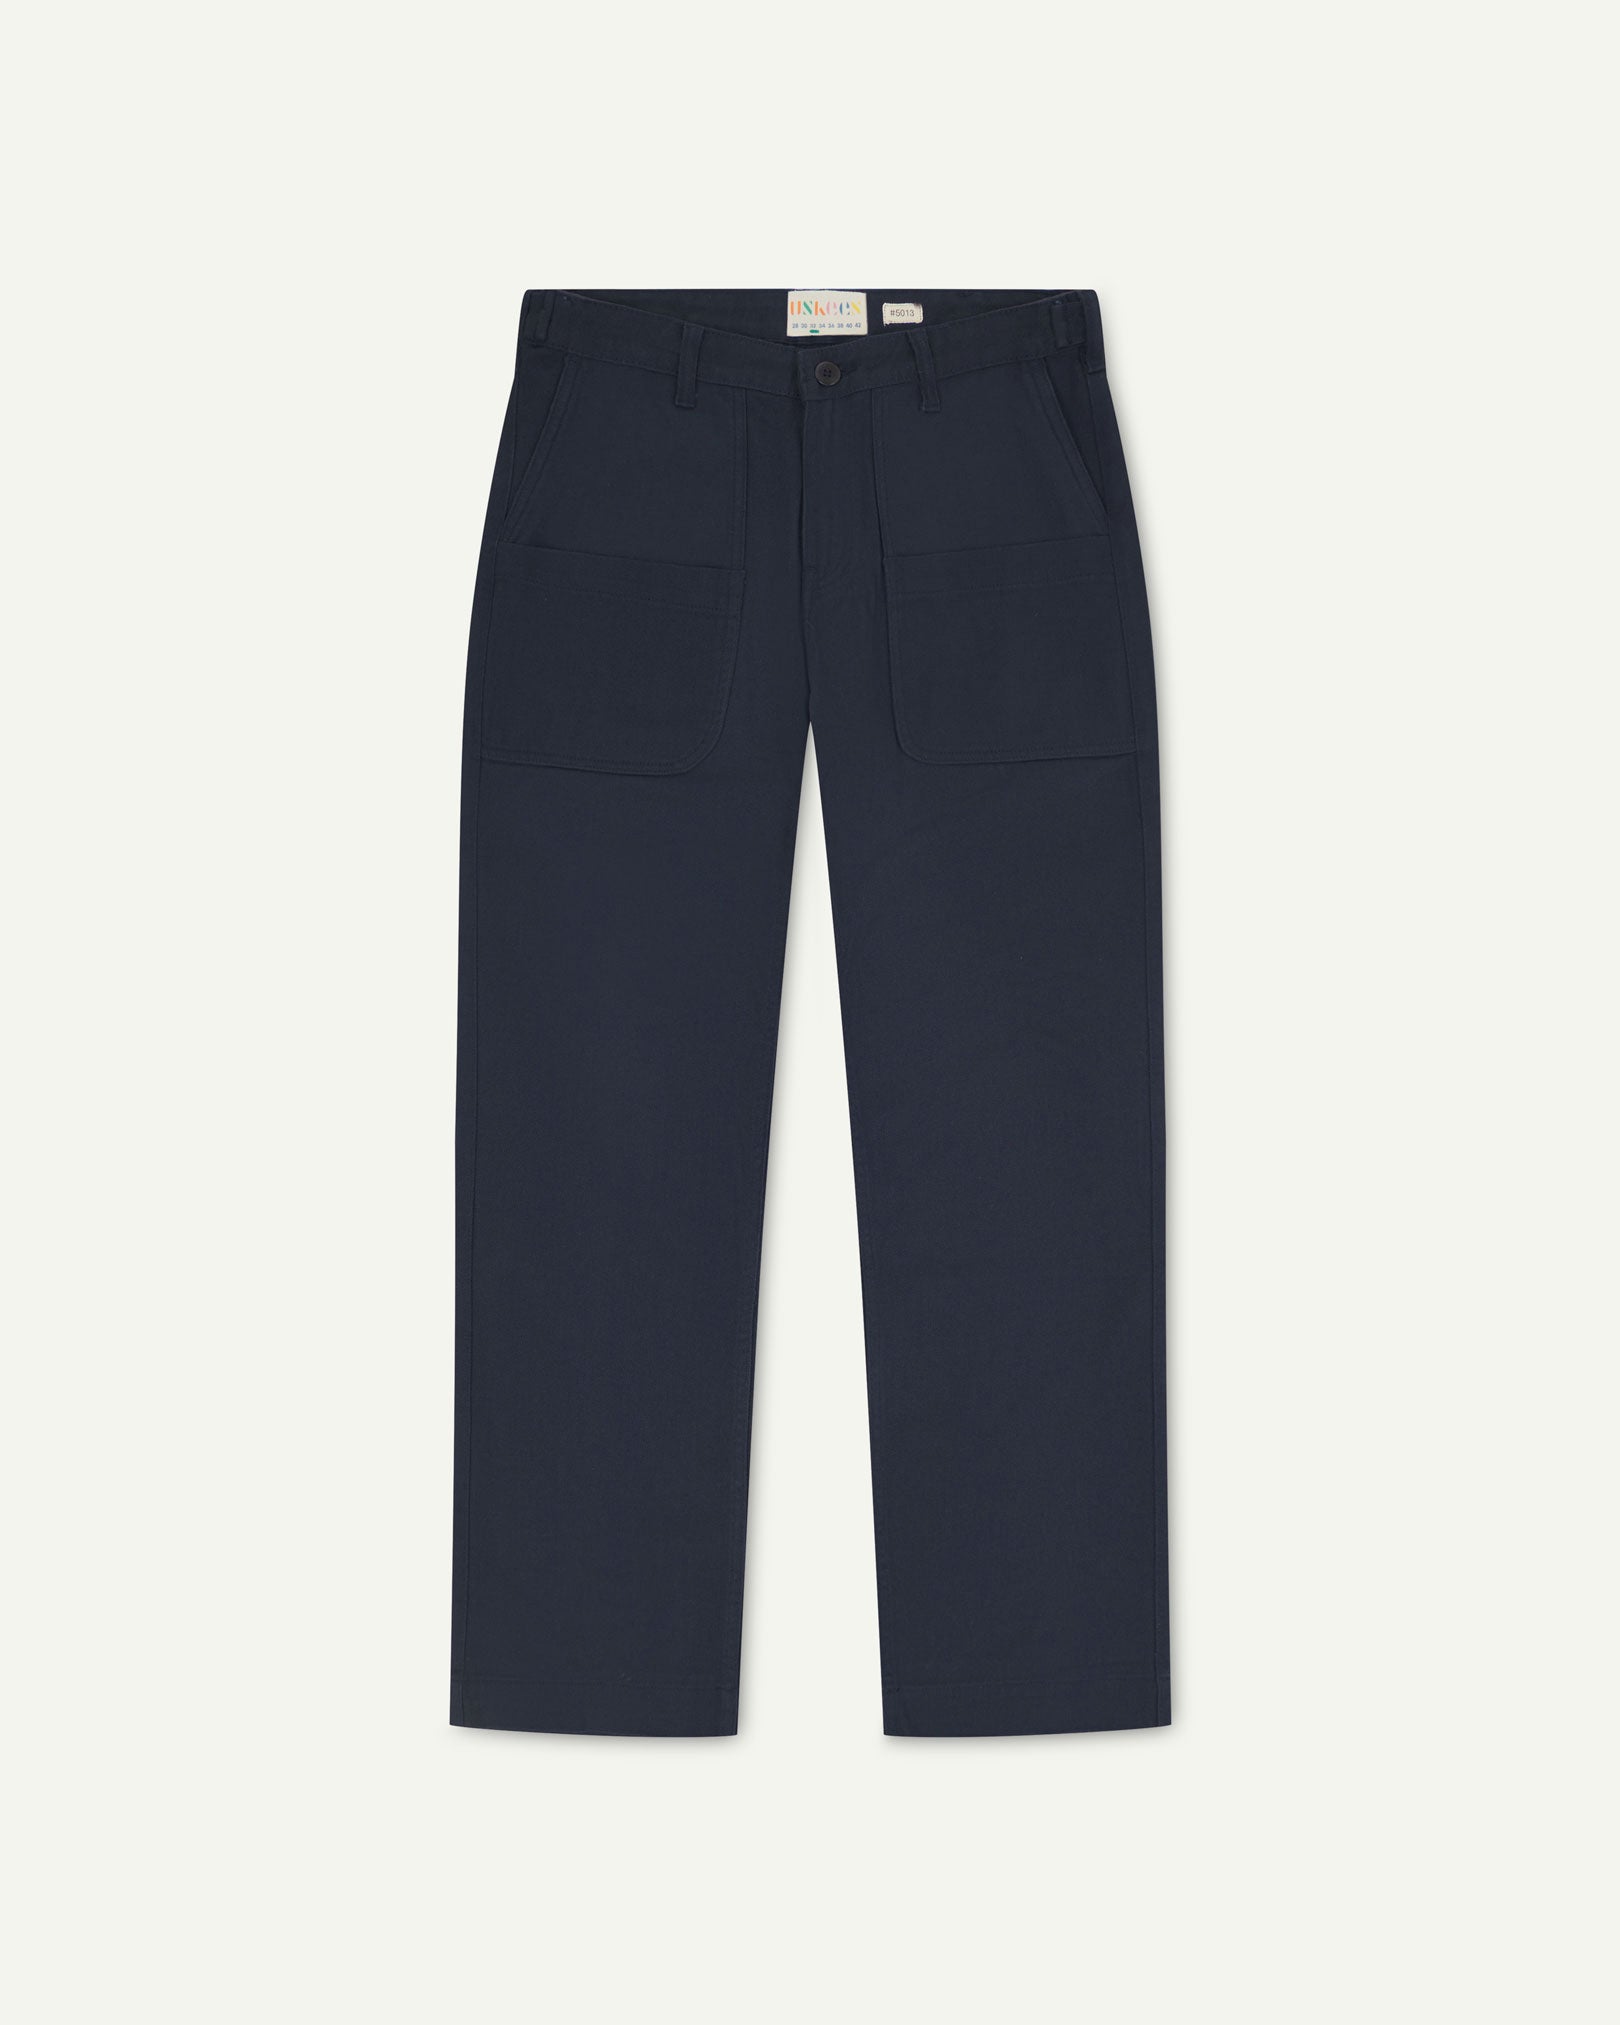 Front flat view of 5013 Uskees drill straight leg pants in dark blue, with focus on front pockets, layered pockets, belt loops and Uskees branding label.